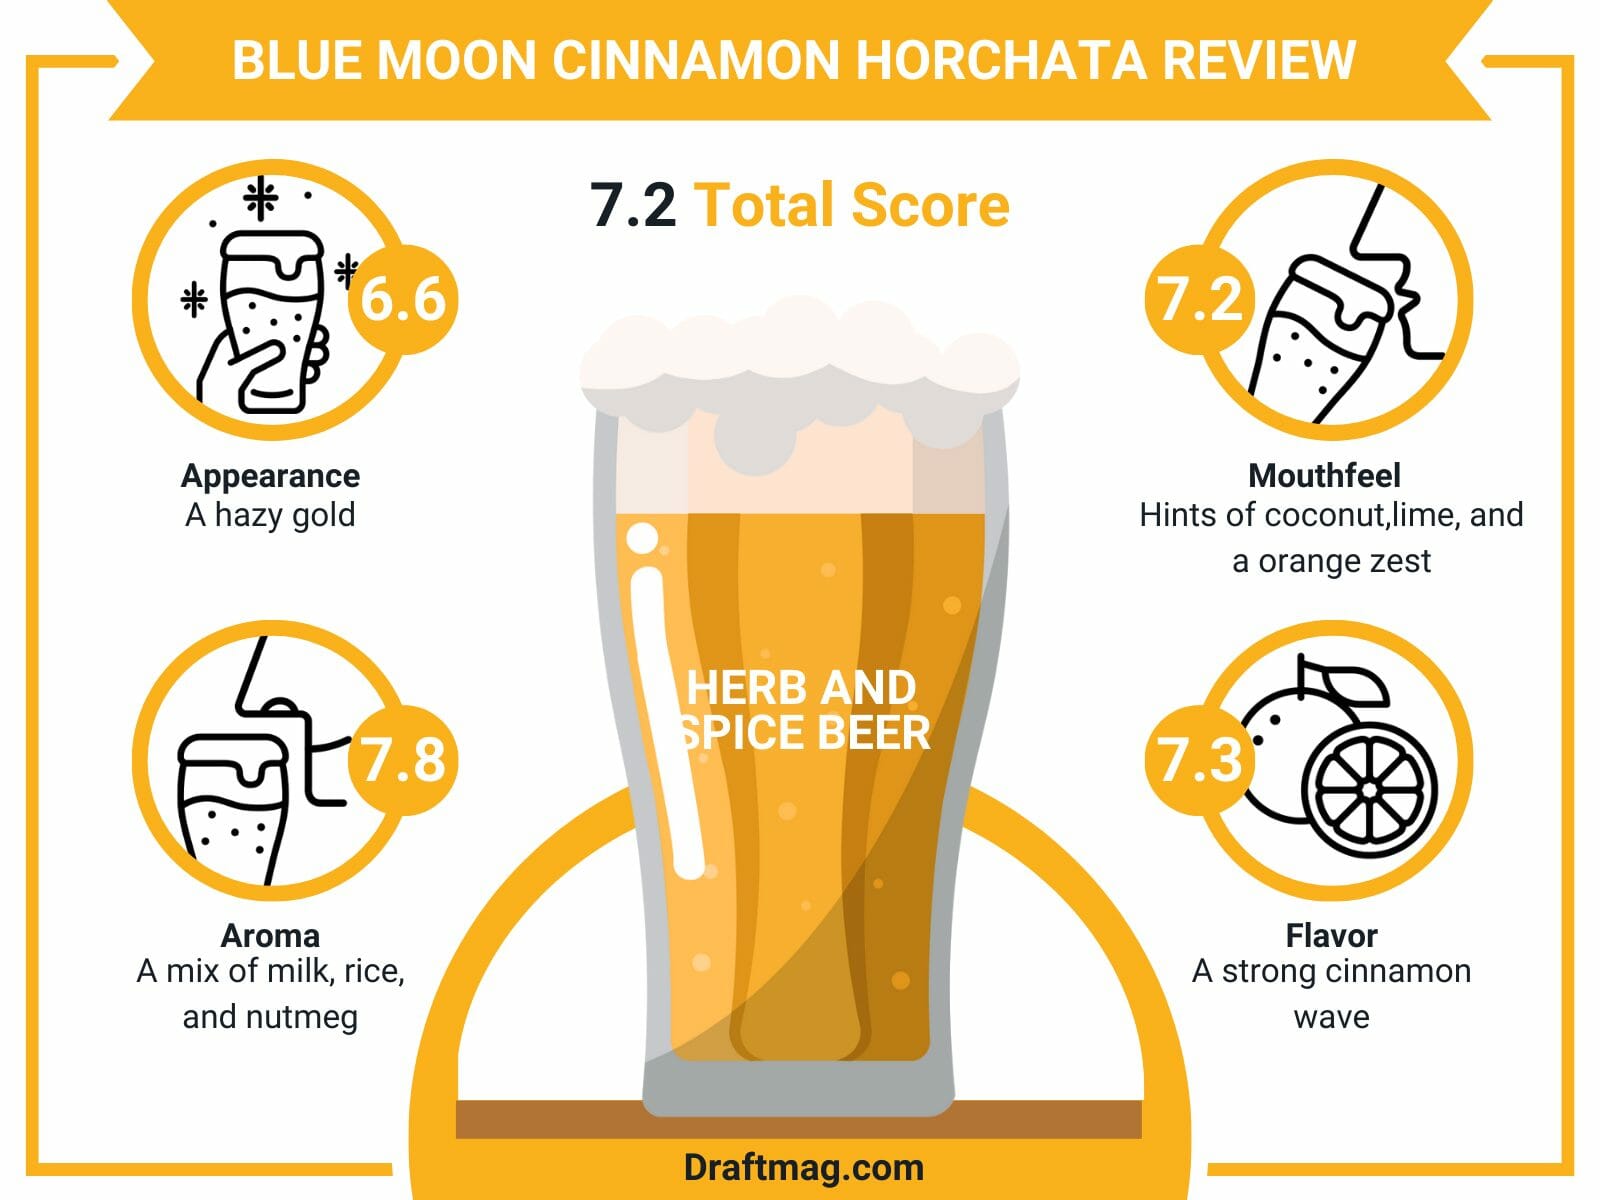 Blue moon cinnamon horchata review infographic